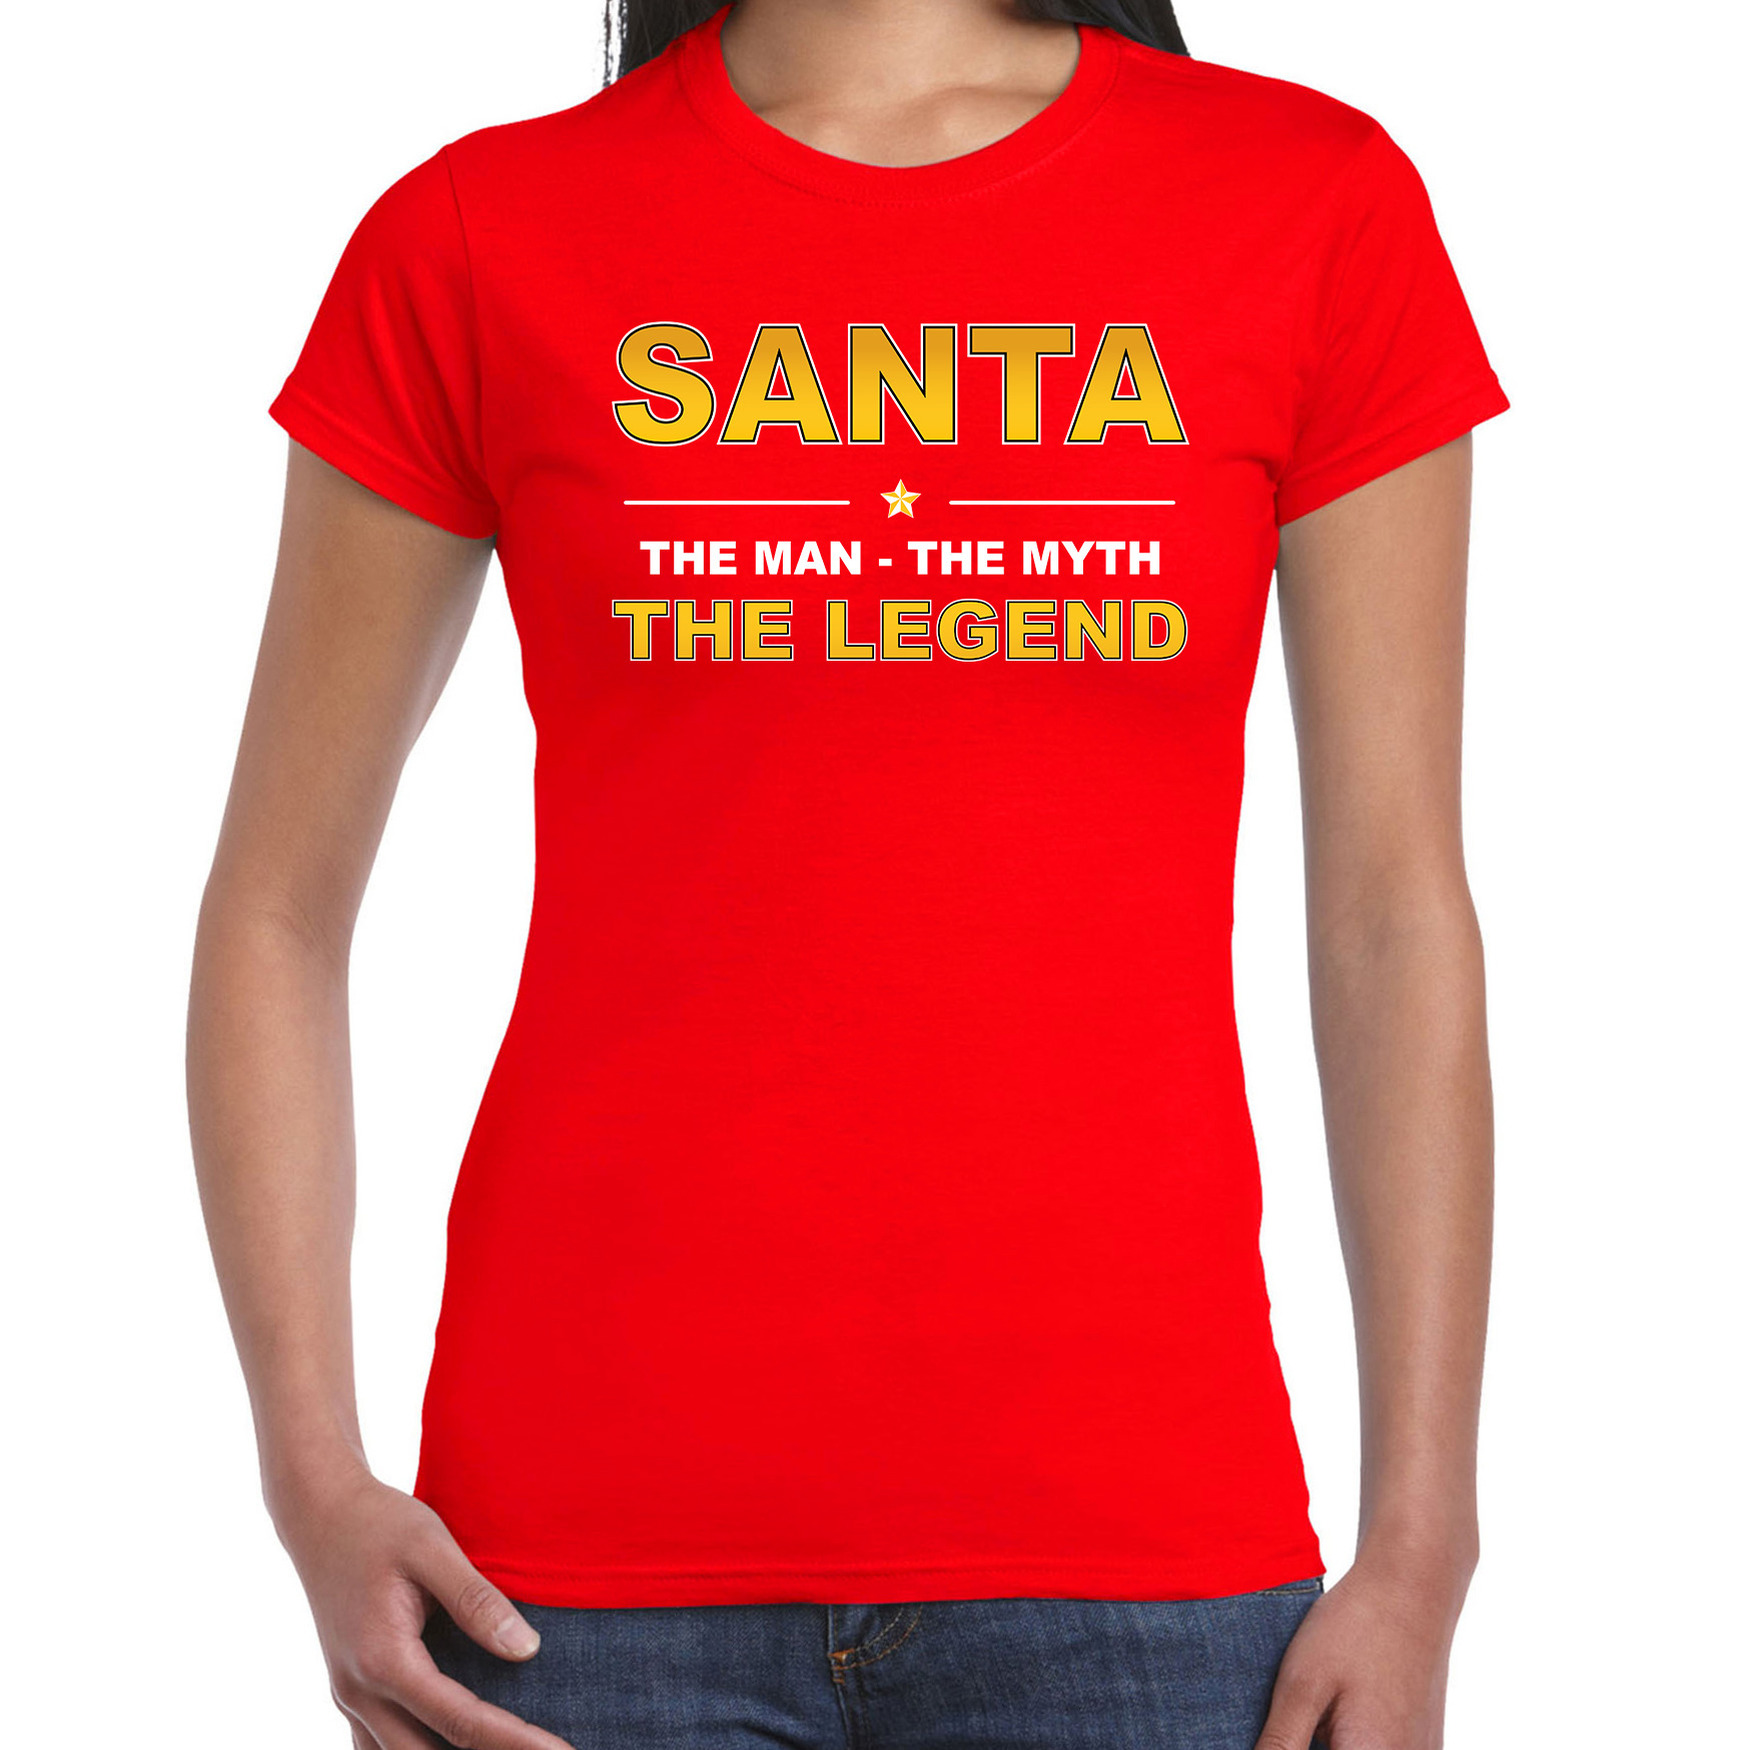 Santa t-shirt-the man-the myth-the legend rood voor dames